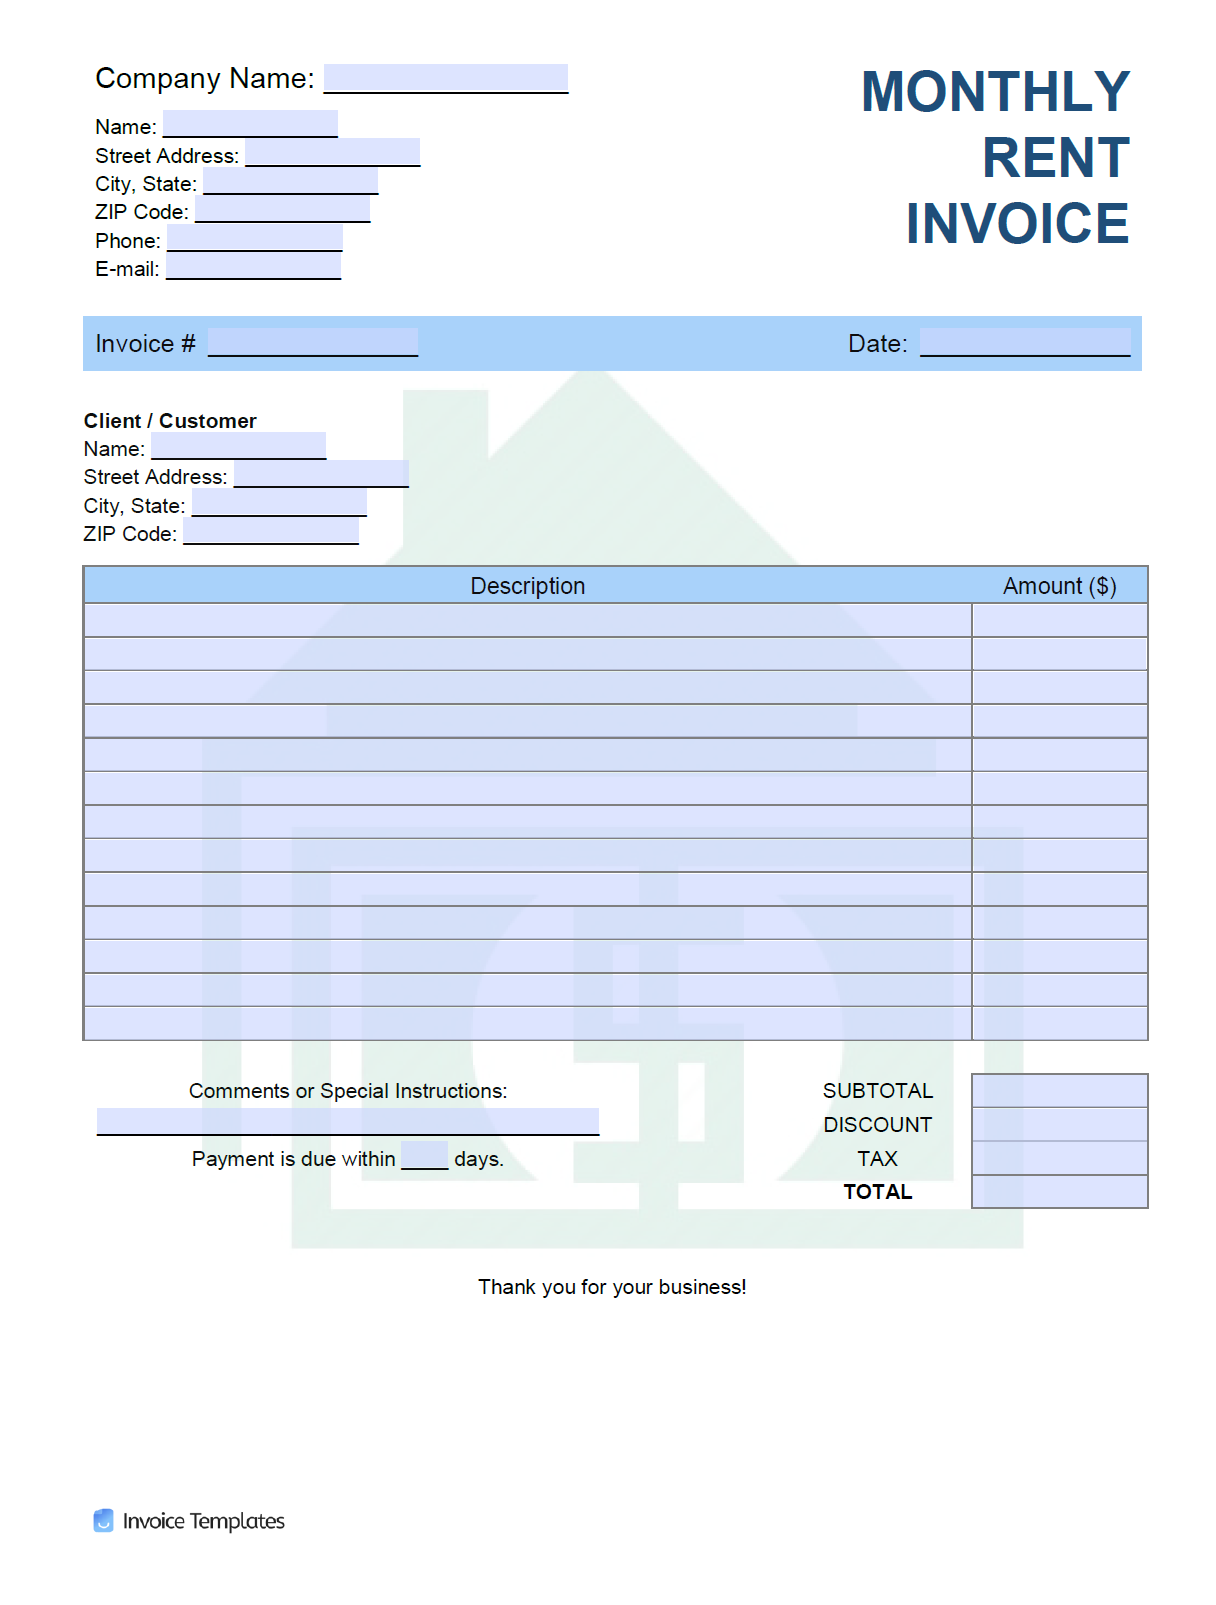 Free Monthly Rent (Landlord) Invoice Template  PDF  WORD  EXCEL Throughout Monthly Rent Invoice Template